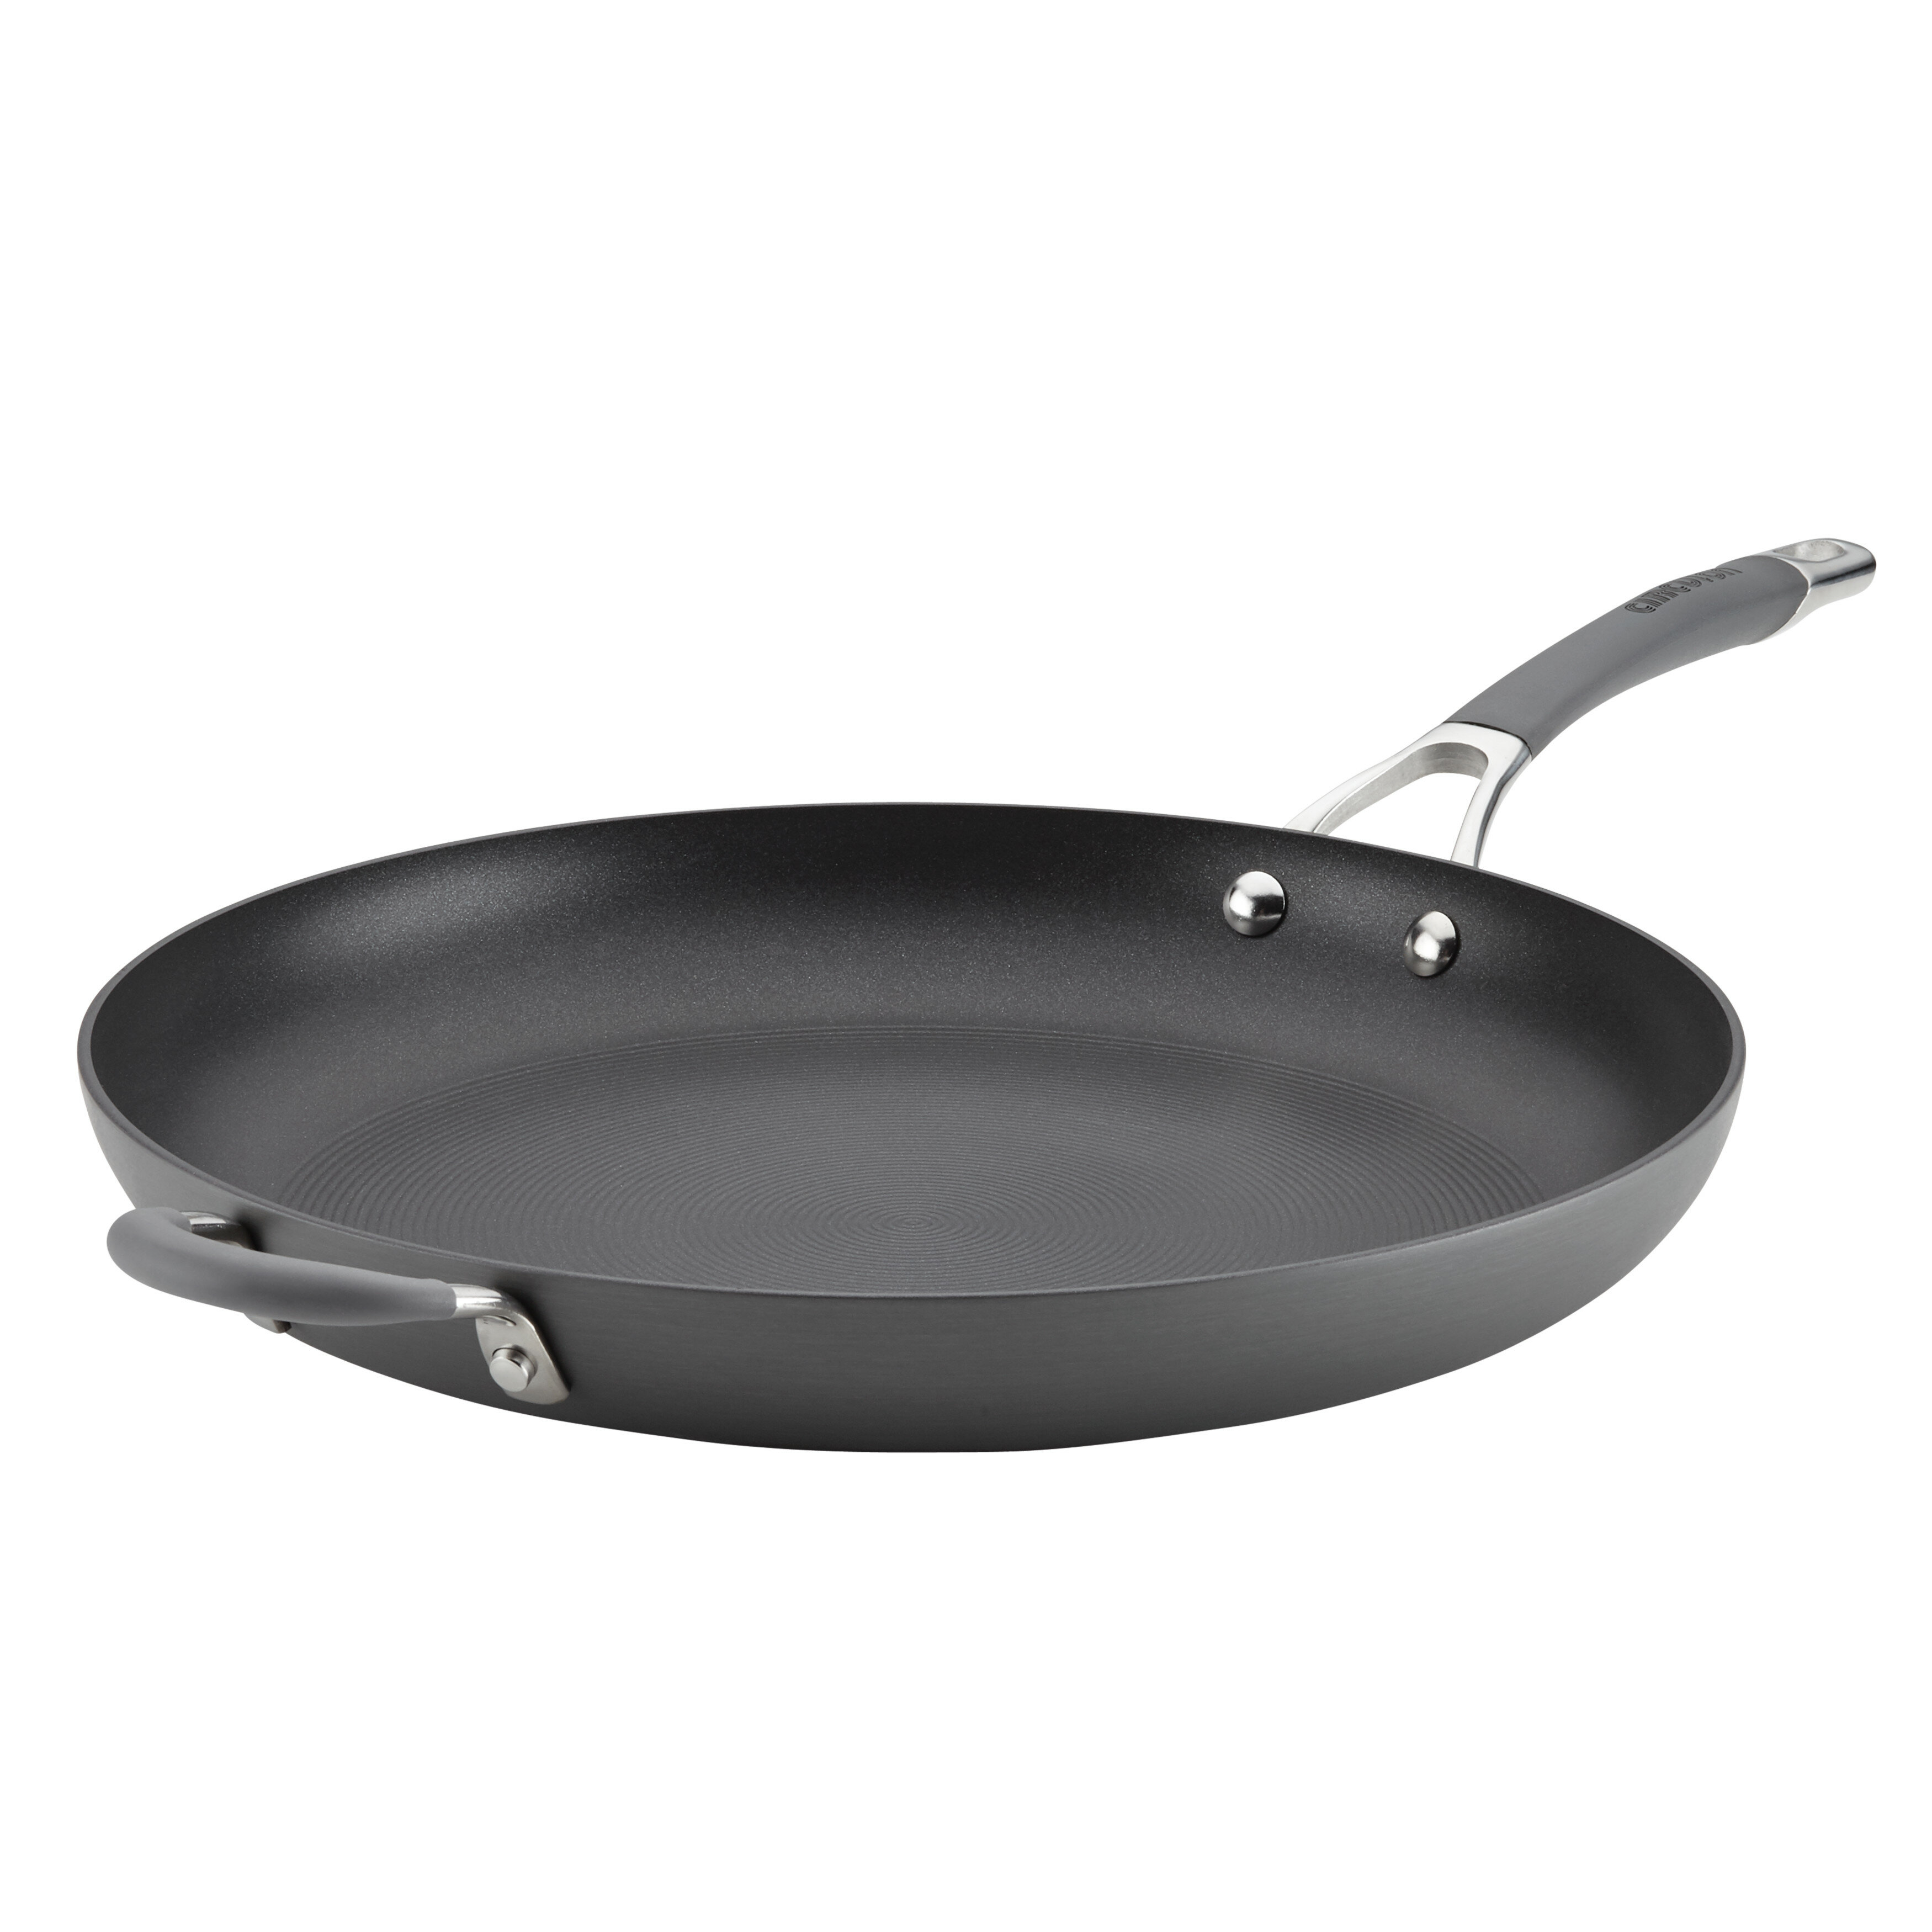 Circulon Radiance Hard-Anodized Nonstick Frying Pan with Helper